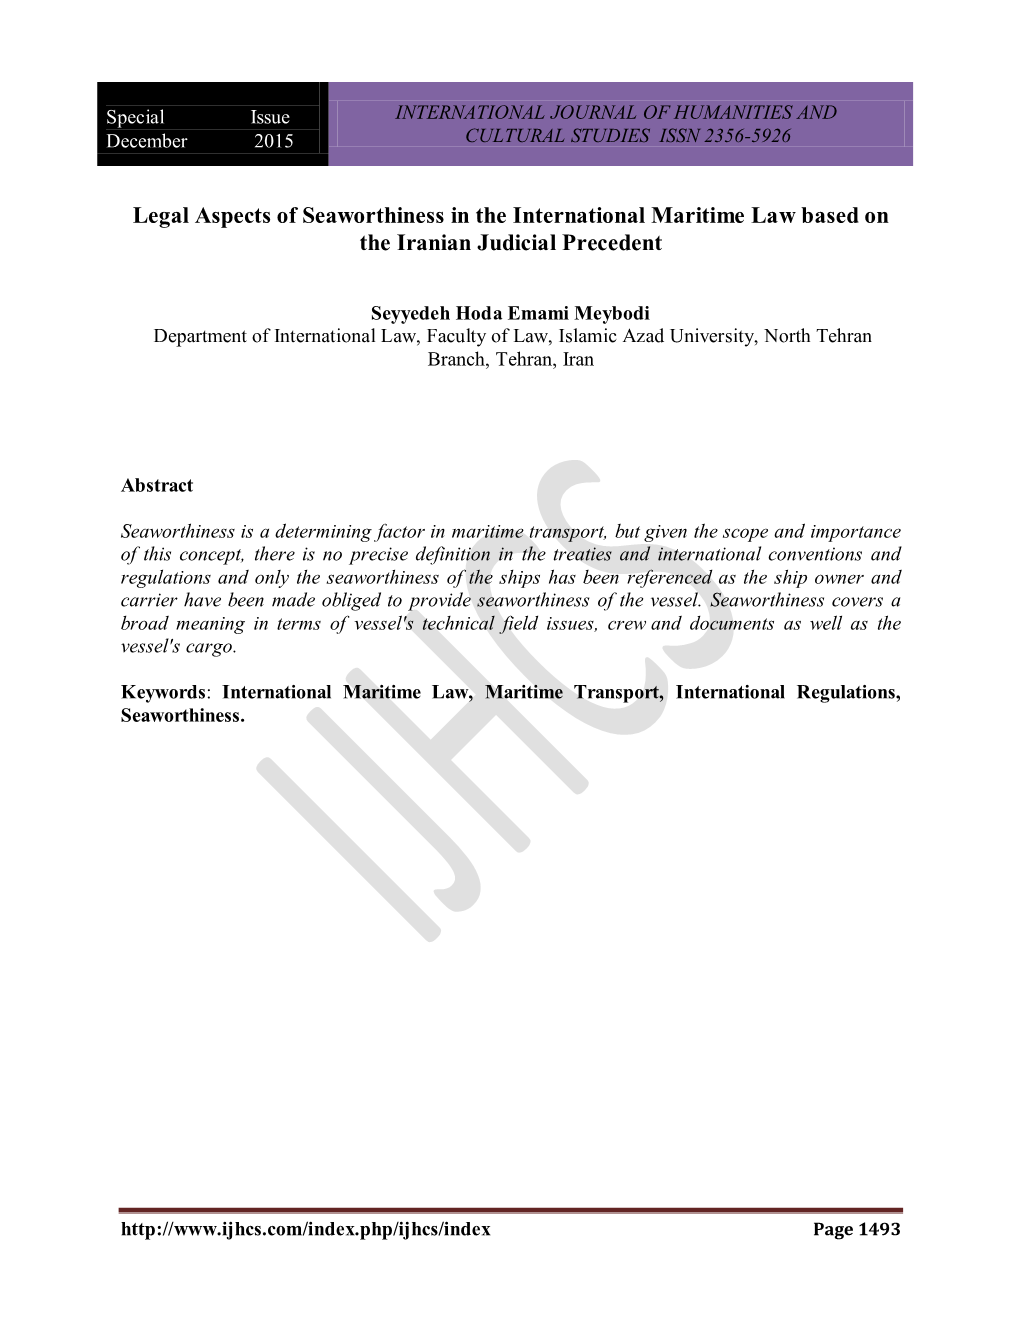 Legal Aspects of Seaworthiness in the International Maritime Law Based on the Iranian Judicial Precedent